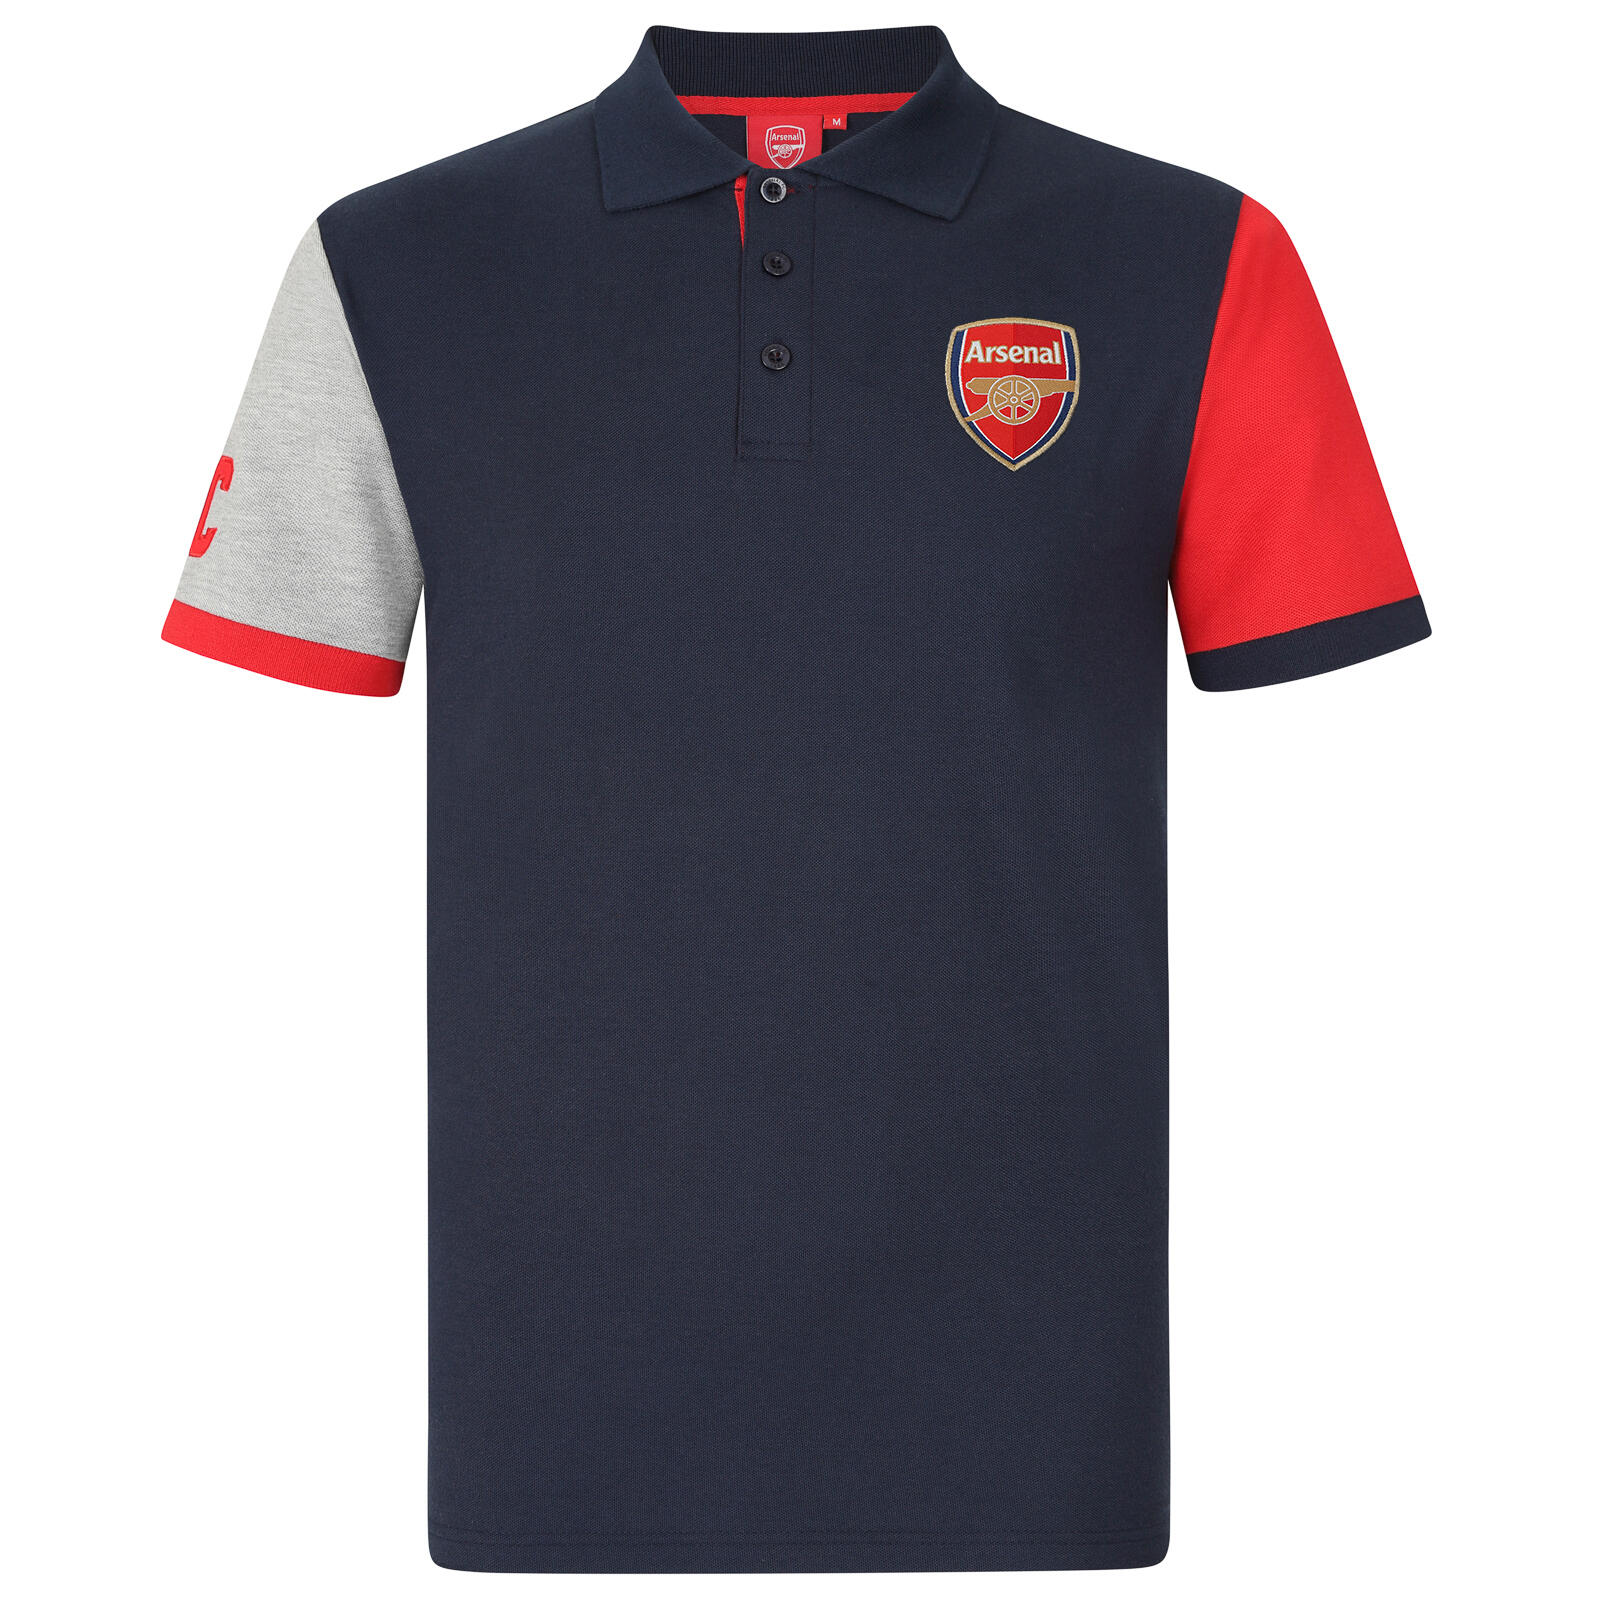 ARSENAL Arsenal FC Mens Polo Shirt Crest OFFICIAL Football Gift